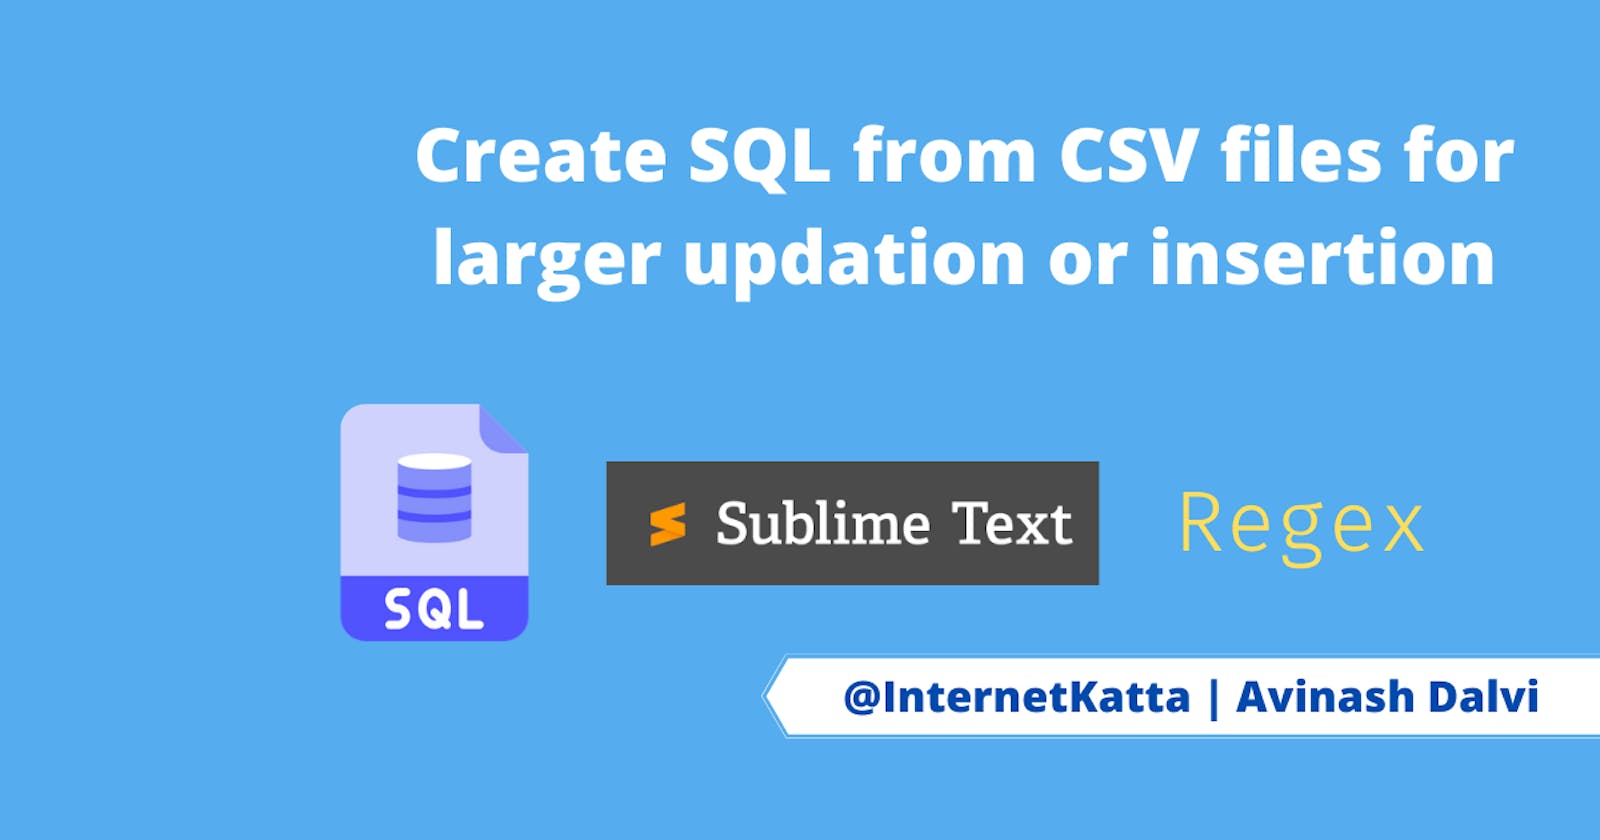 Create SQL from CSV files for larger updation or insertion